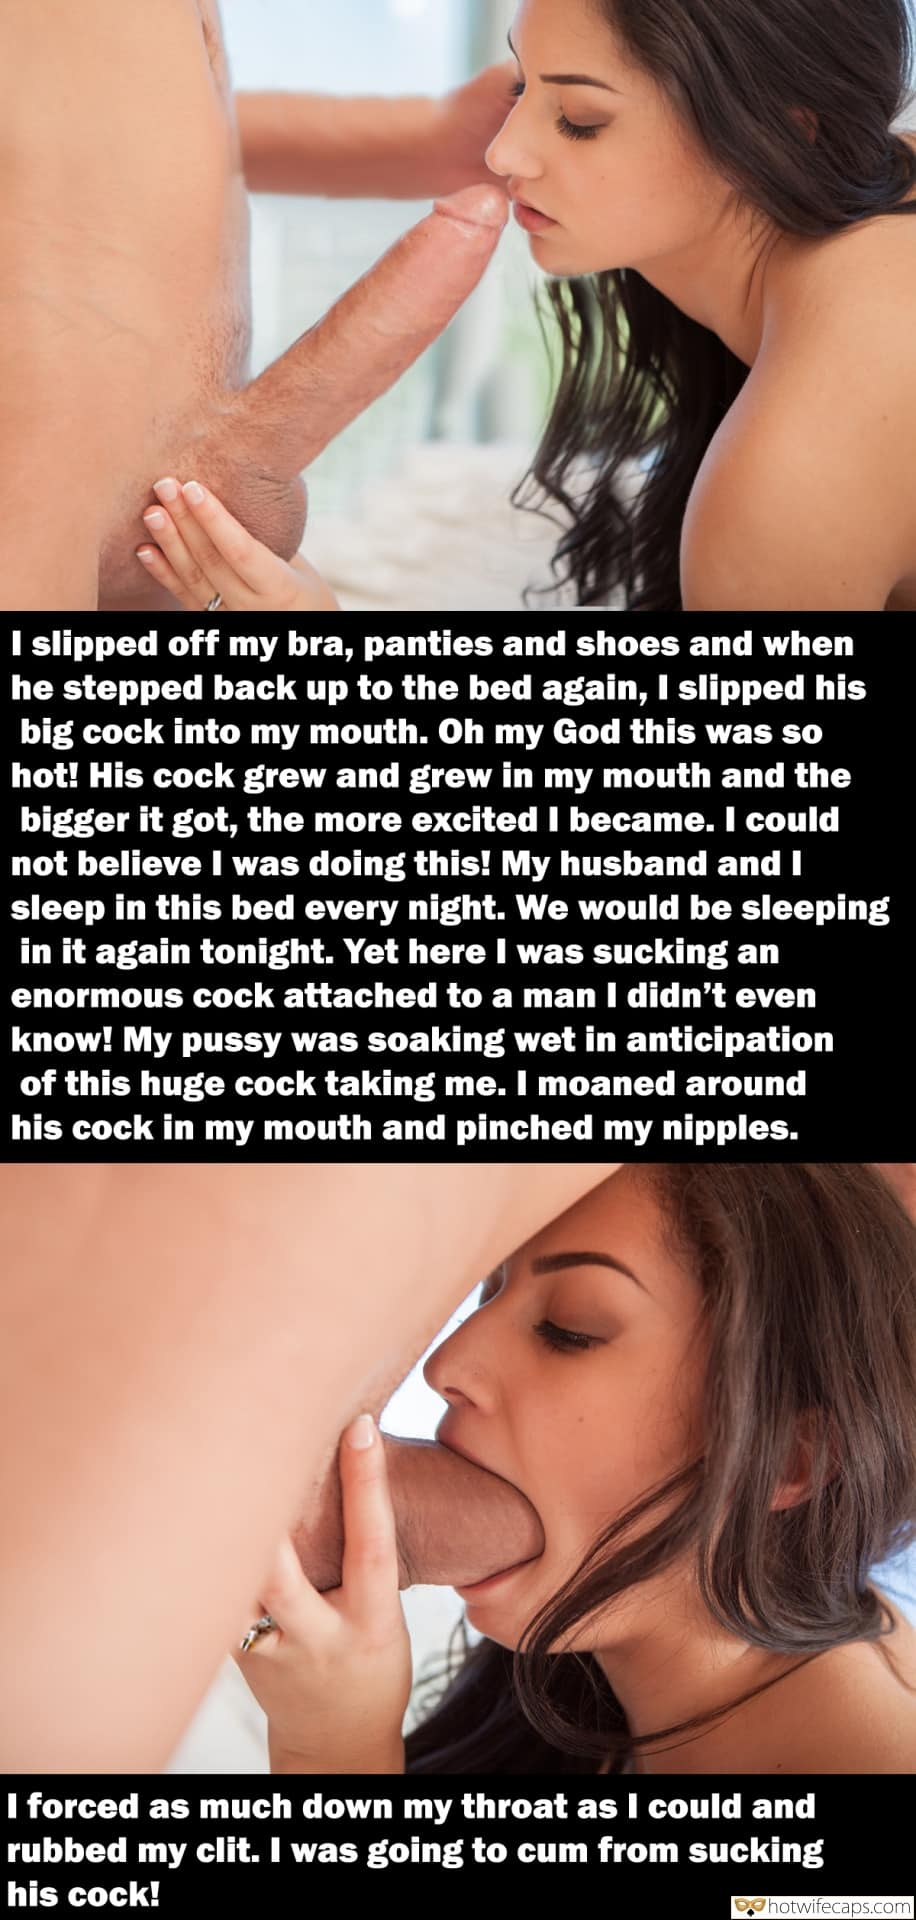 Cuckold Stories Blowjob hotwife caption: I slipped off my bra, panties and shoes and when he stepped back up to the bed again, I slipped his big cock into my mouth. Oh my God this was so hot! His cock grew and grew in my...